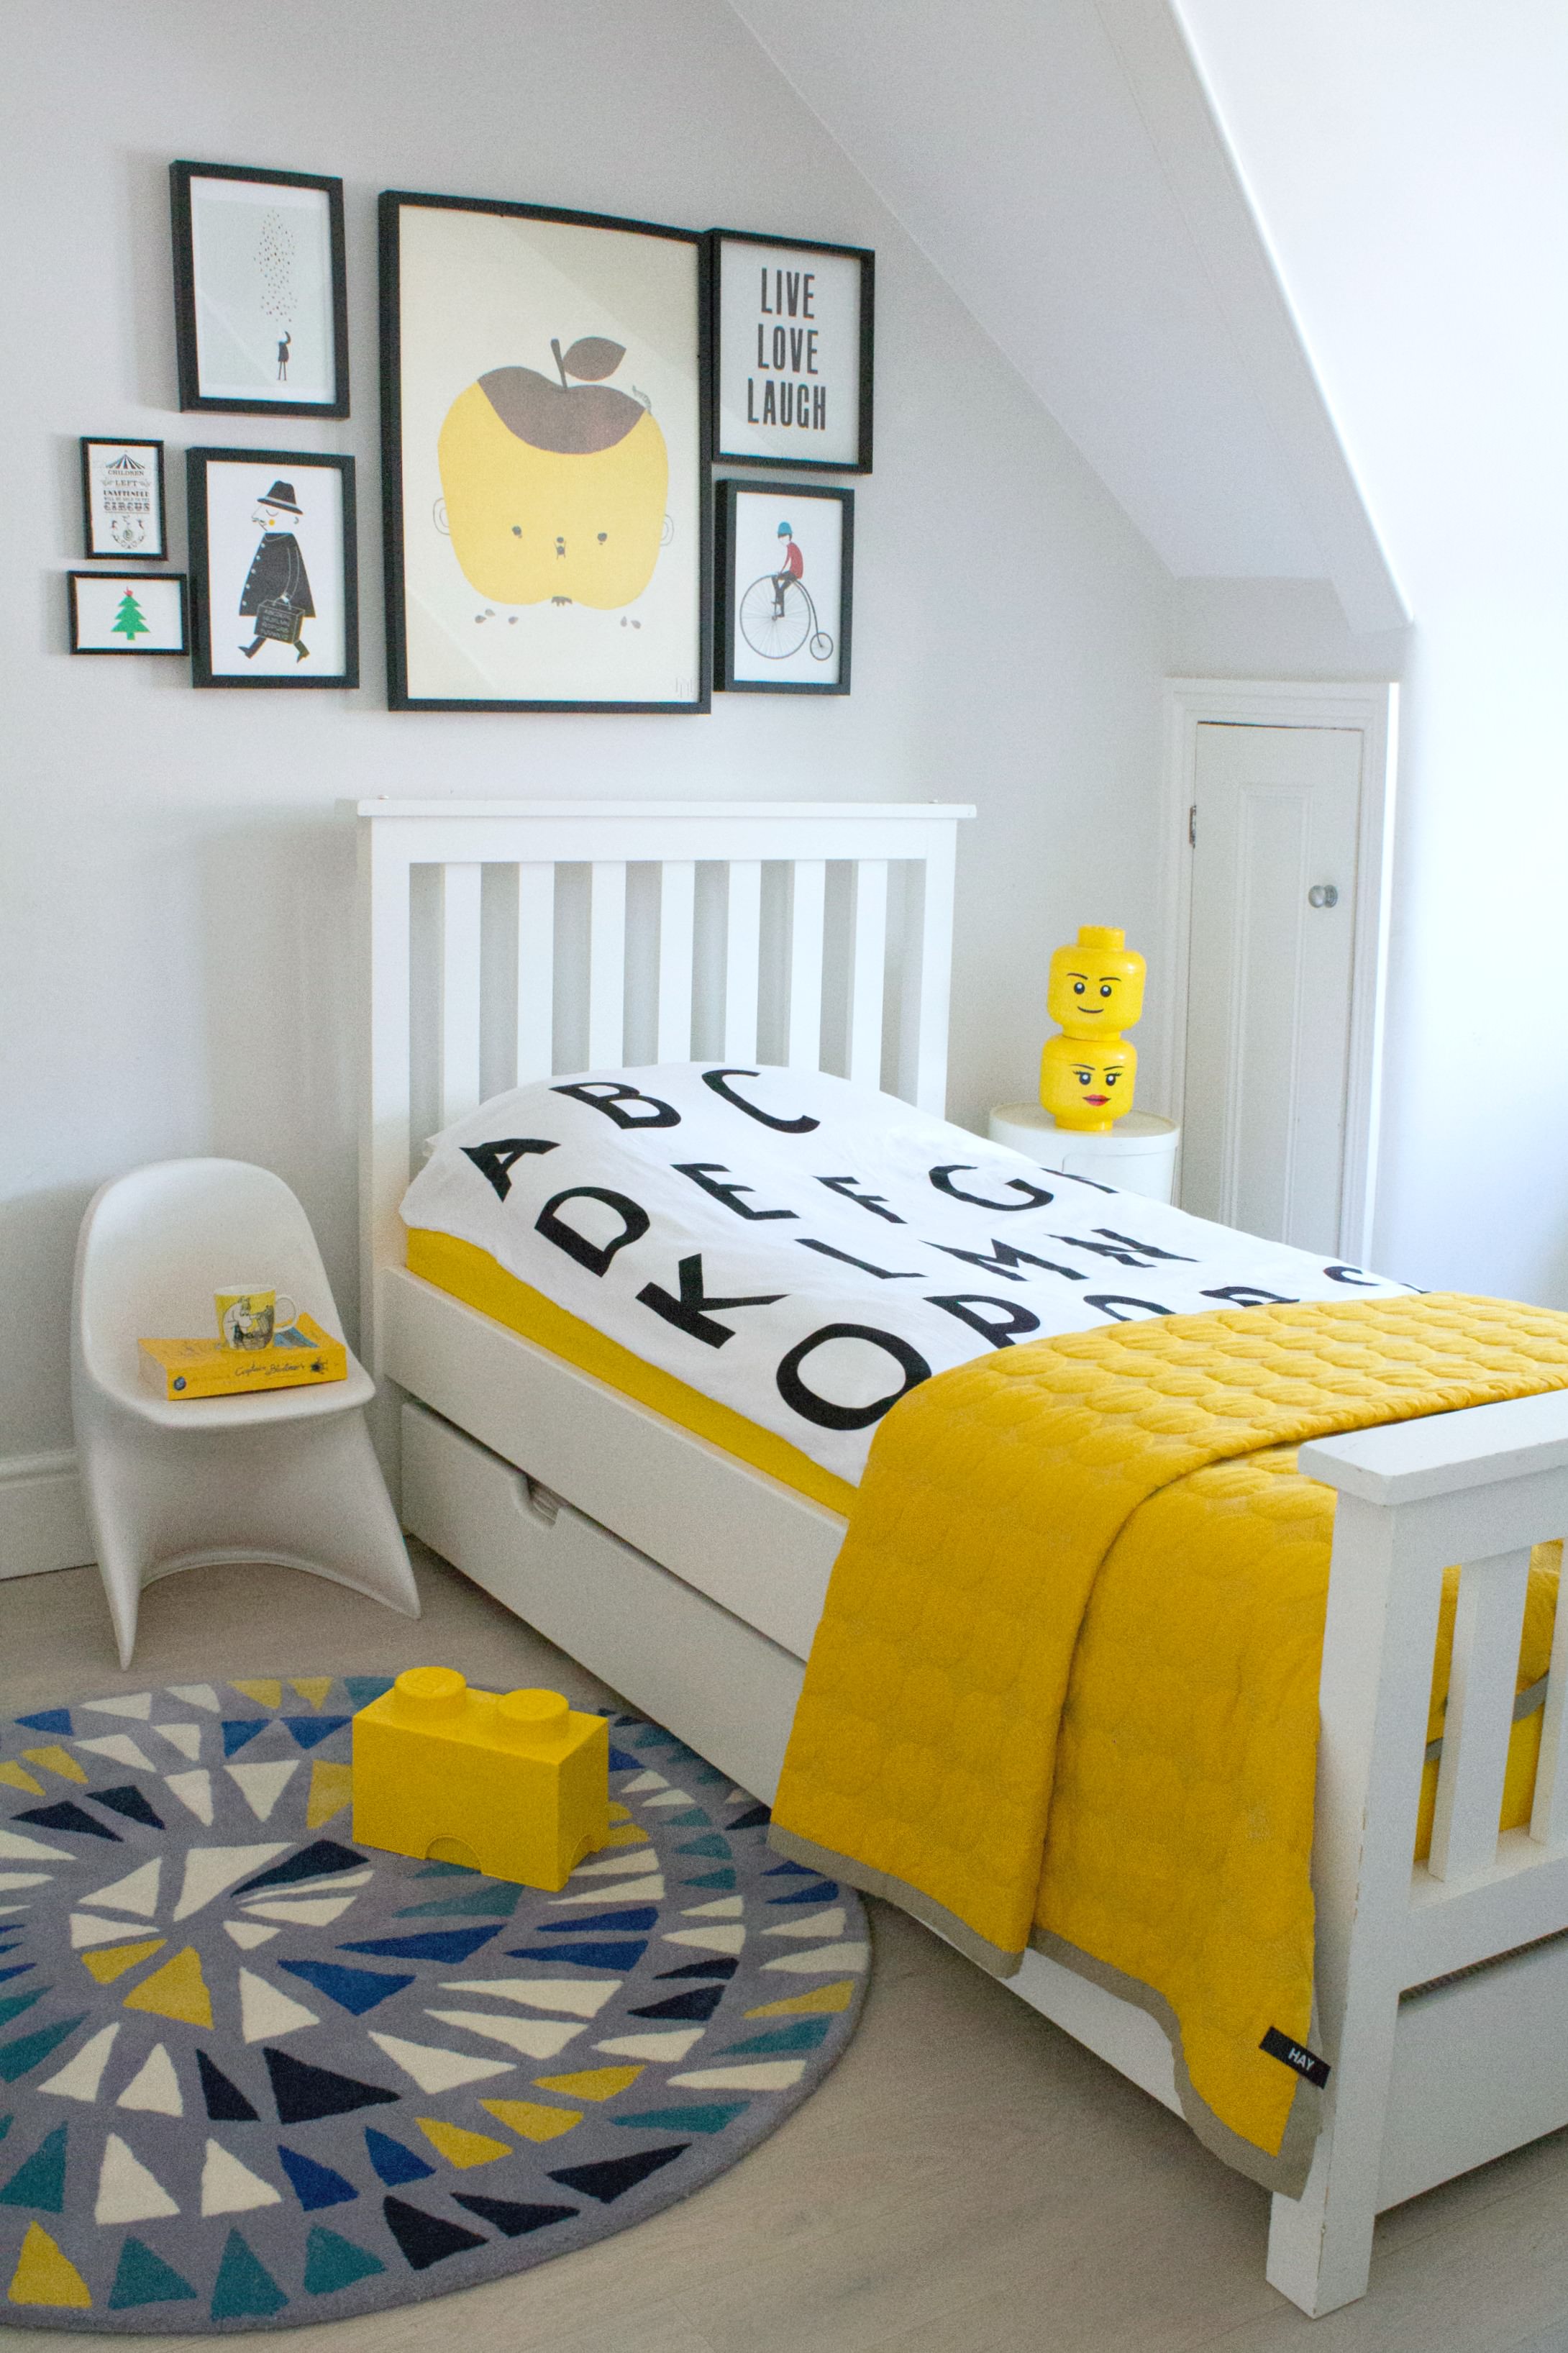 Eve-mattress-in-bedroom-photo-and-styling-by-Geraldine-Tan-littlebigbell.com